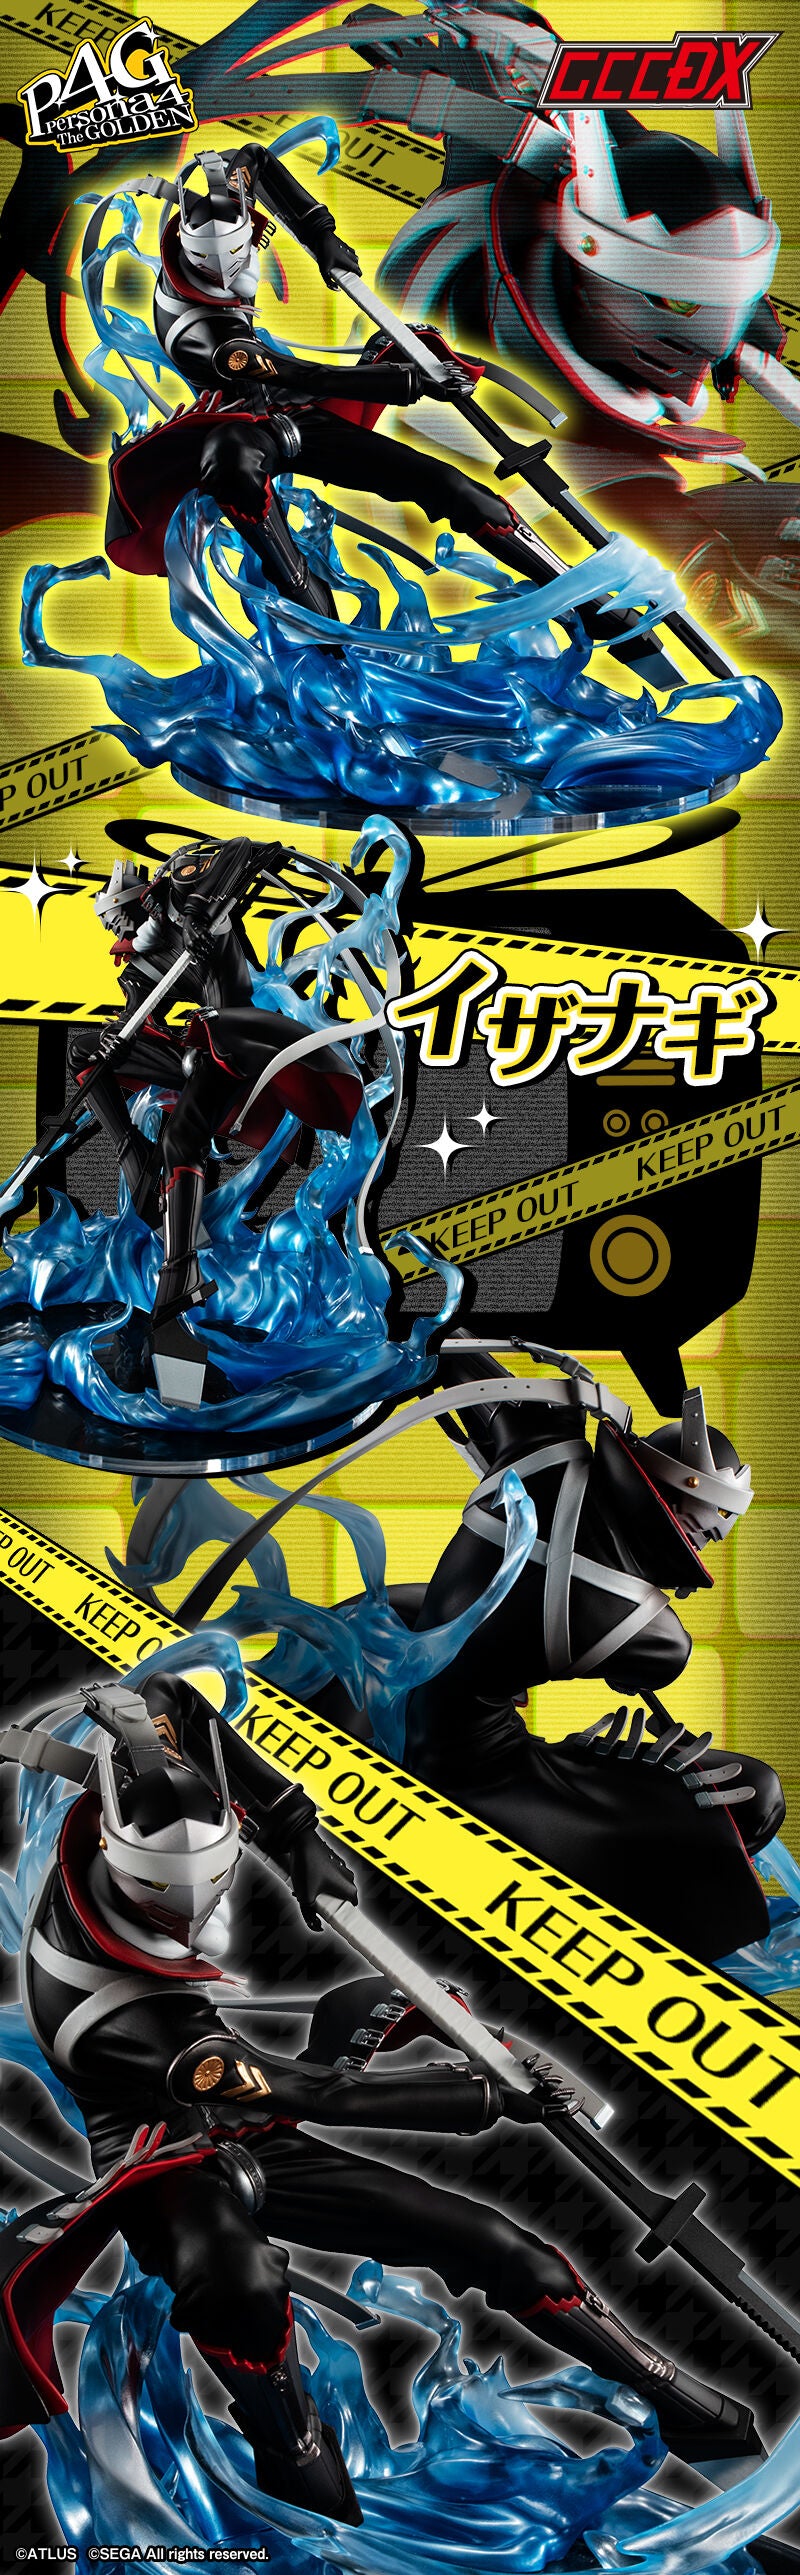 PERSONA 4  MEGAHOUSE Game Characters Collection DX  Golden Izanagi Ver.2